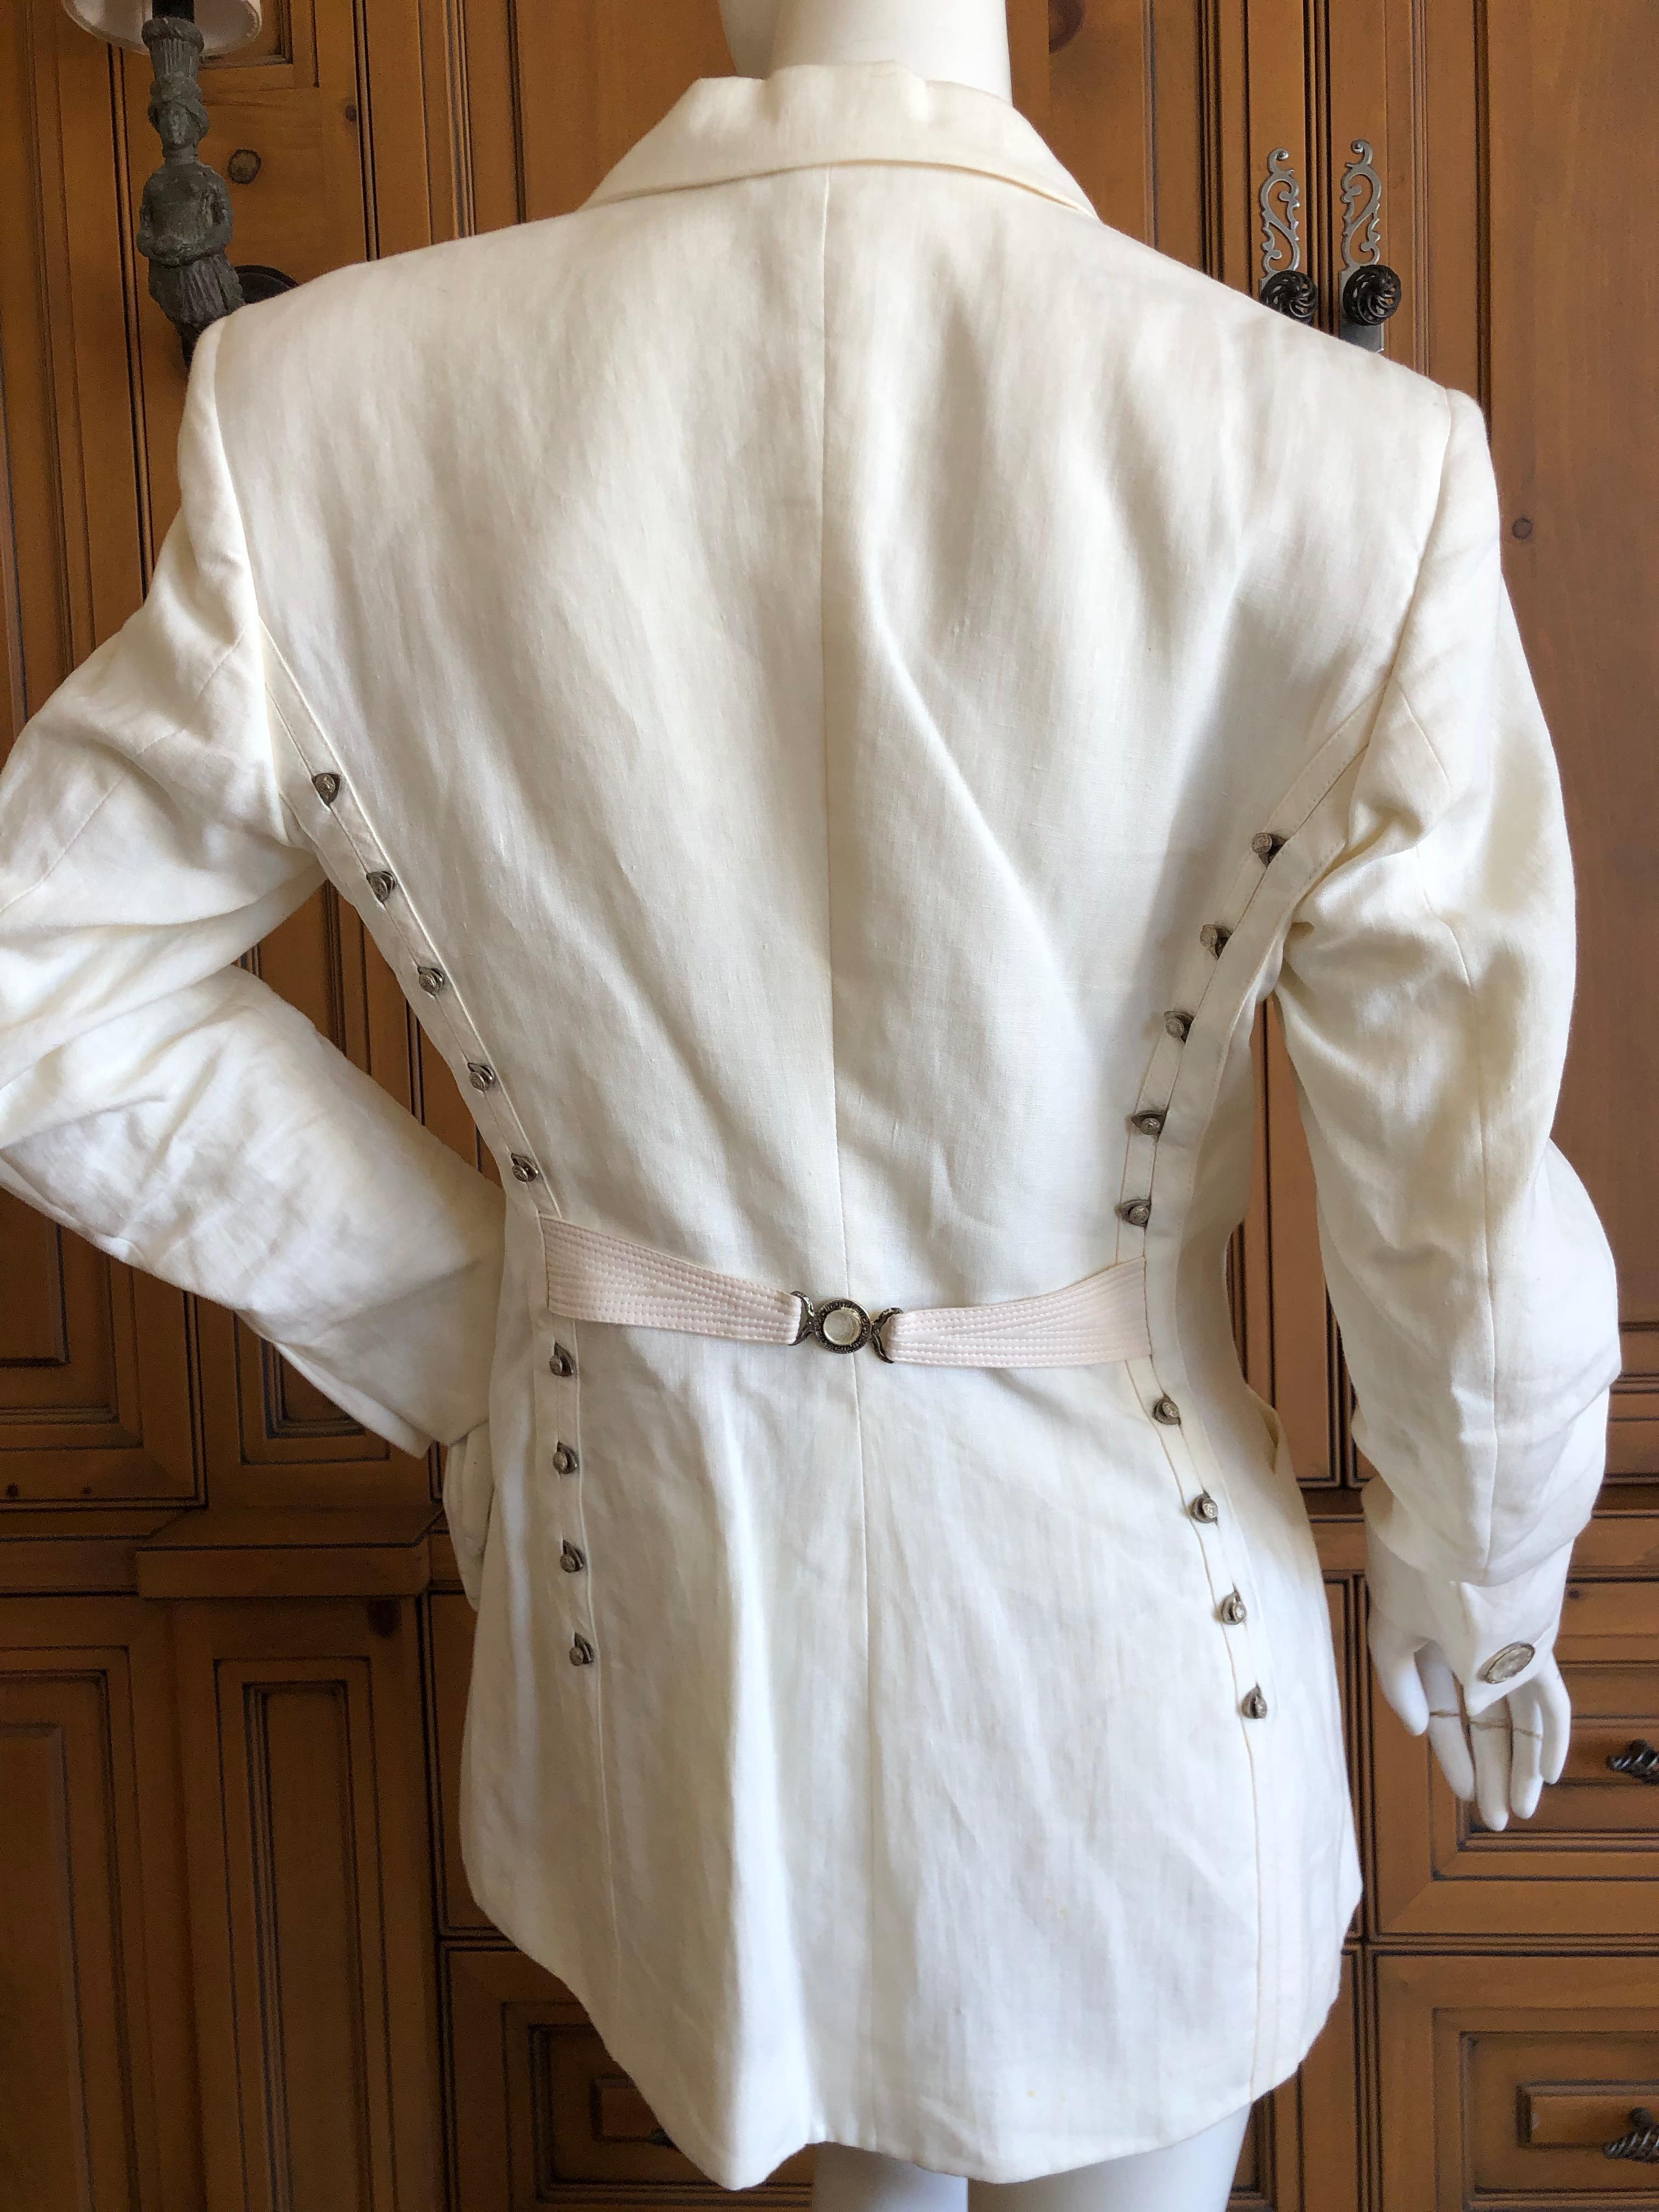 Gianni Versace Couture Fall 1992 Ivory Linen Tuxedo Suit w Corset Stay Details In Excellent Condition For Sale In Cloverdale, CA